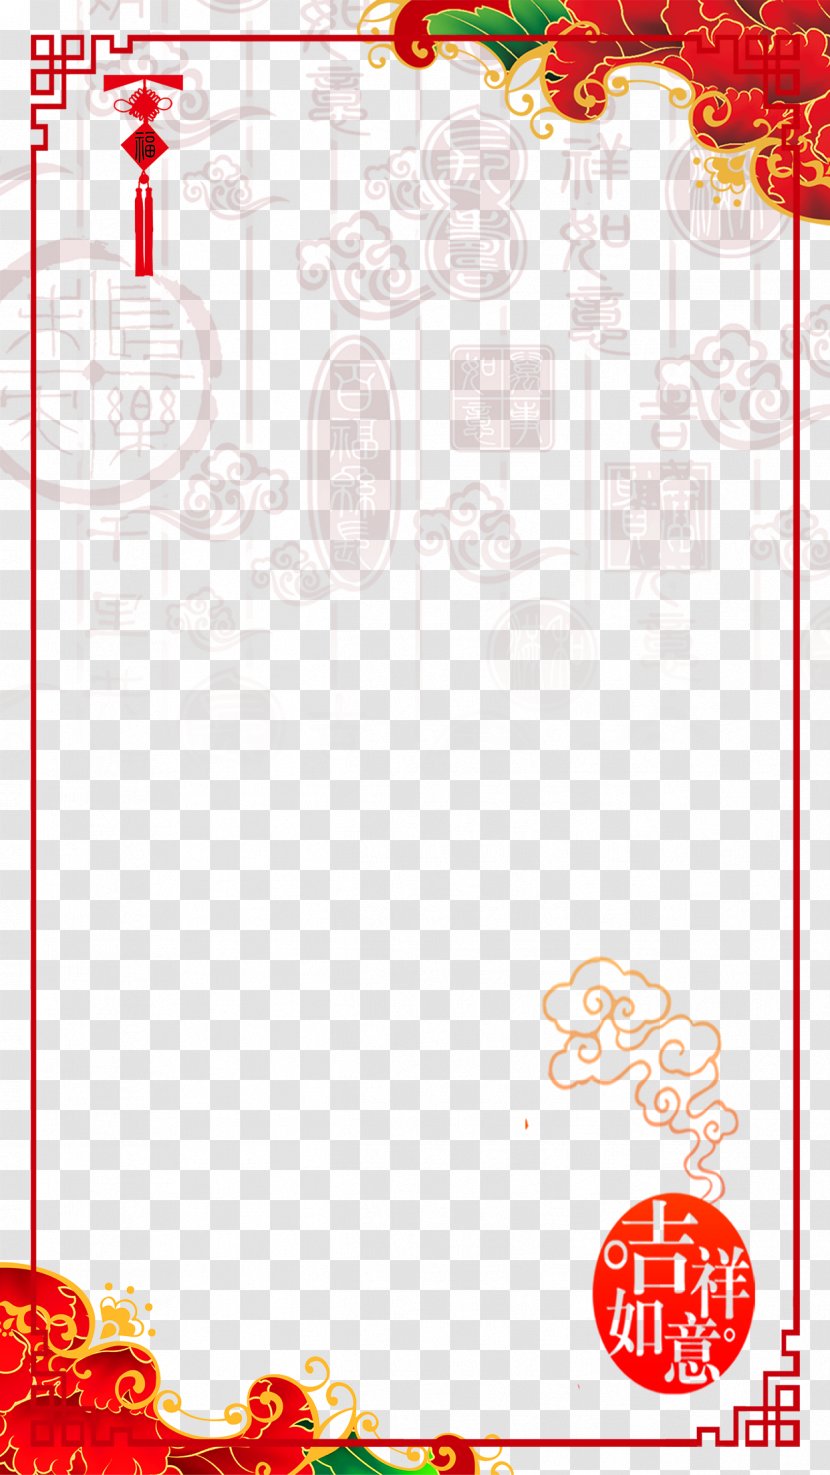 Chinese New Year Years Day Eve Public Holidays In China - Good Luck Border H5 Background Transparent PNG